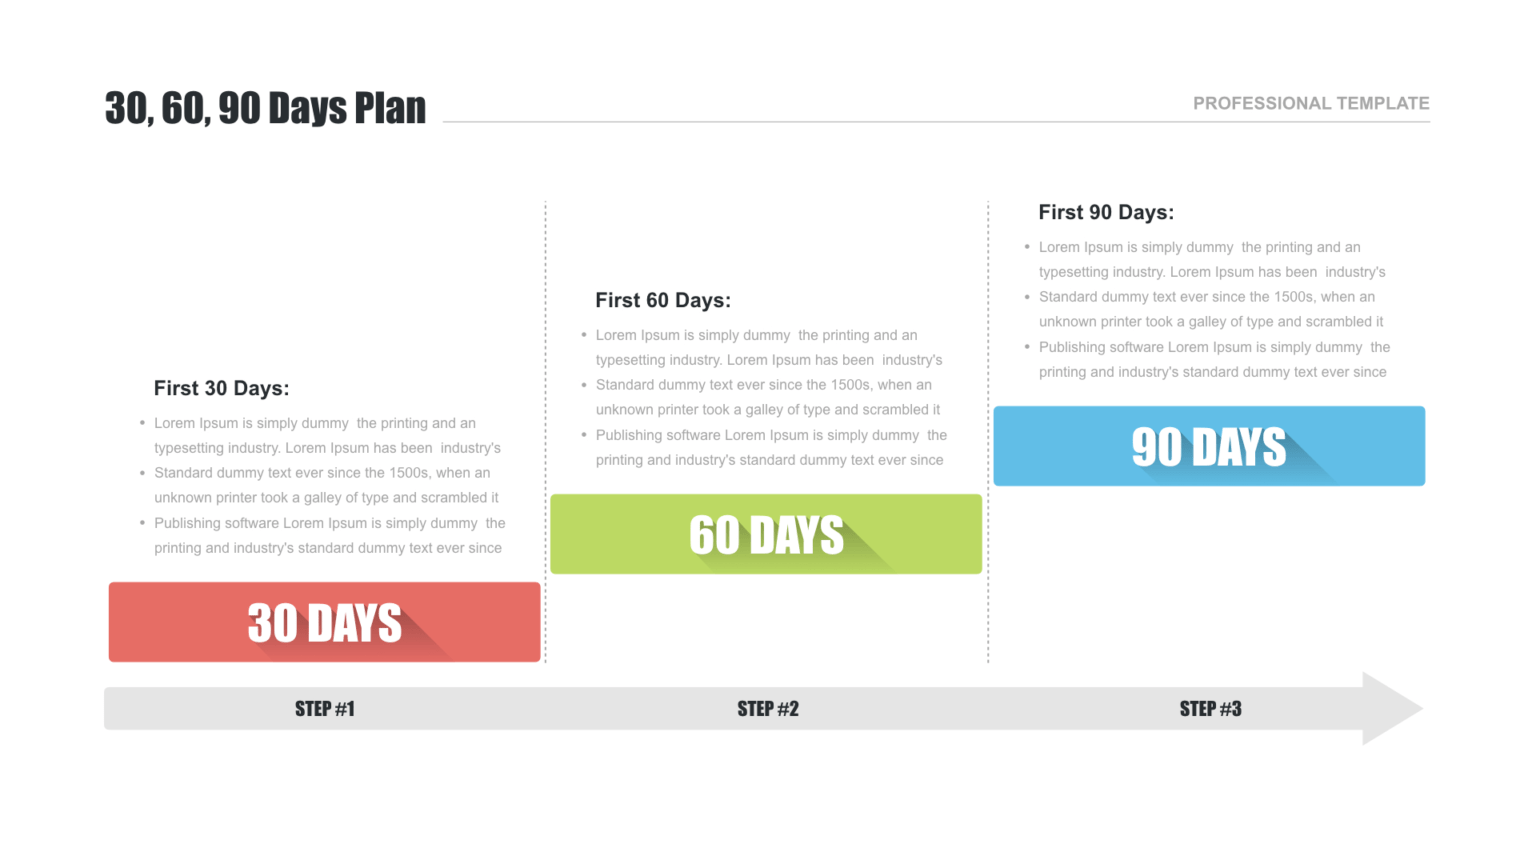 90 day business plan template powerpoint